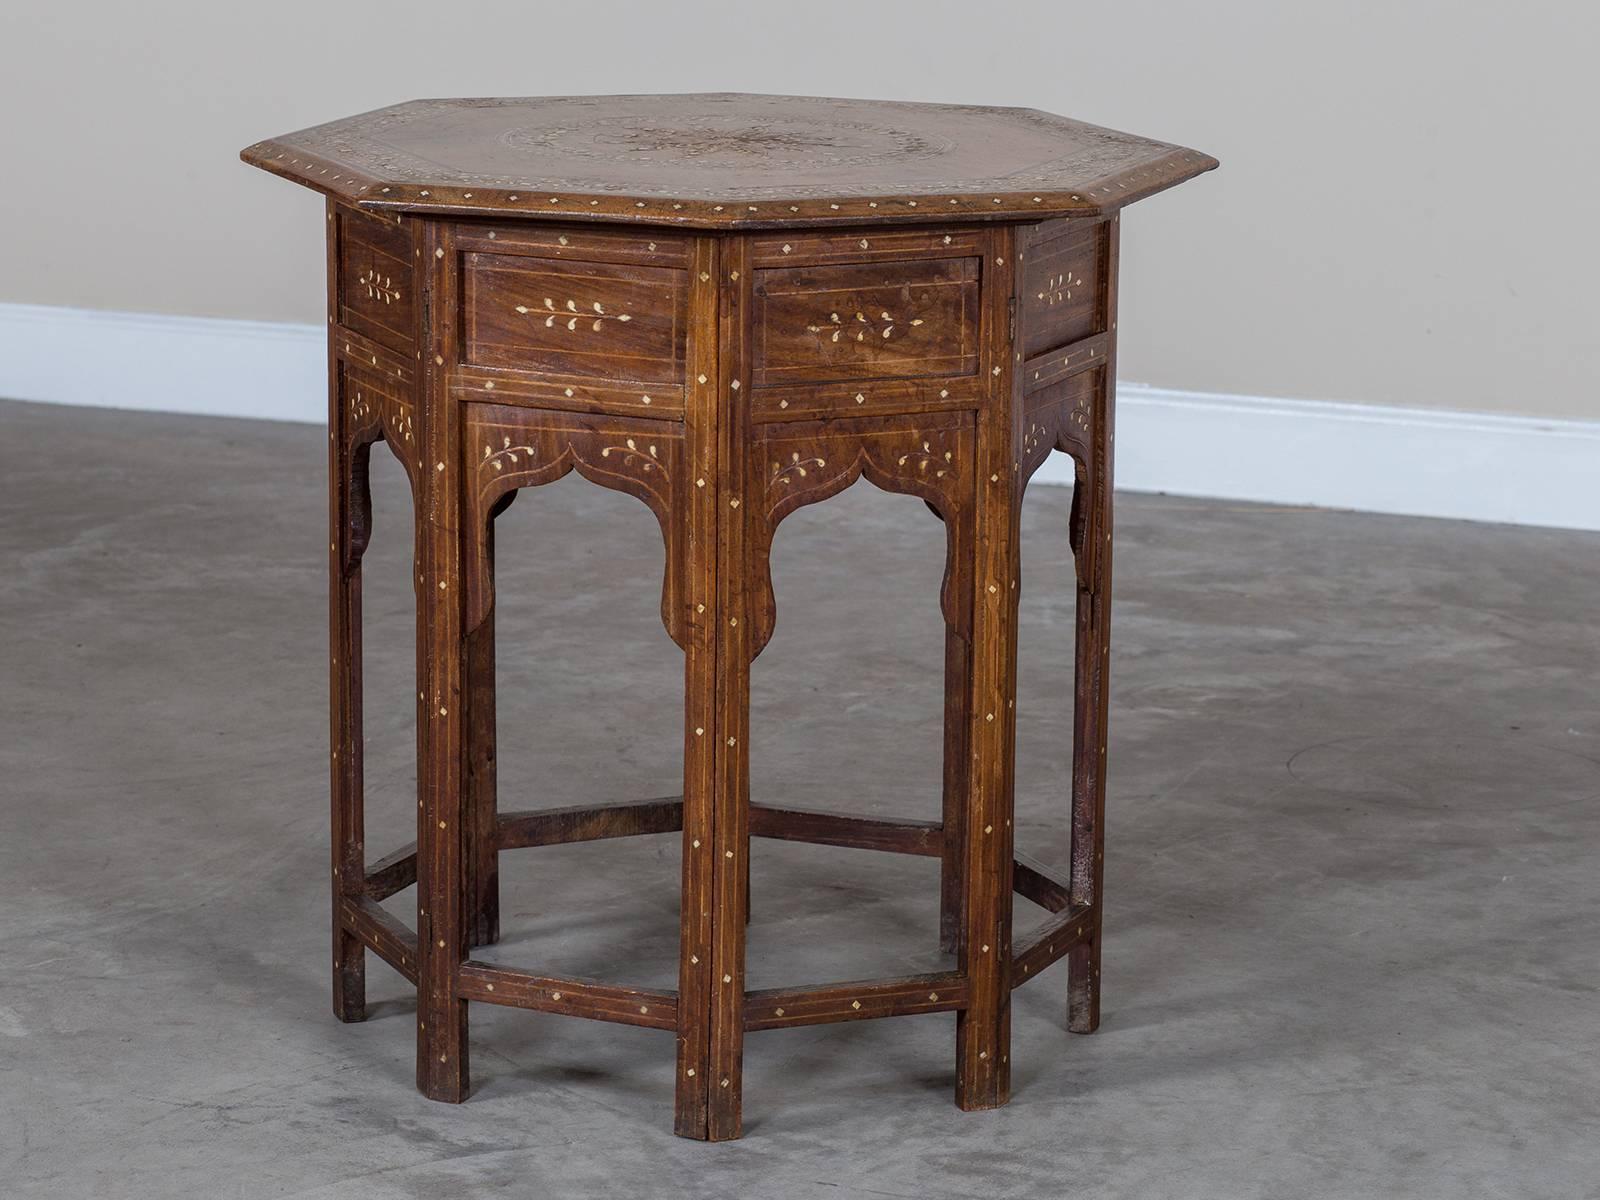 Anglo-Indian Antique Hoshiapur Inlaid Octagonal Indian Walnut Table, circa 1890